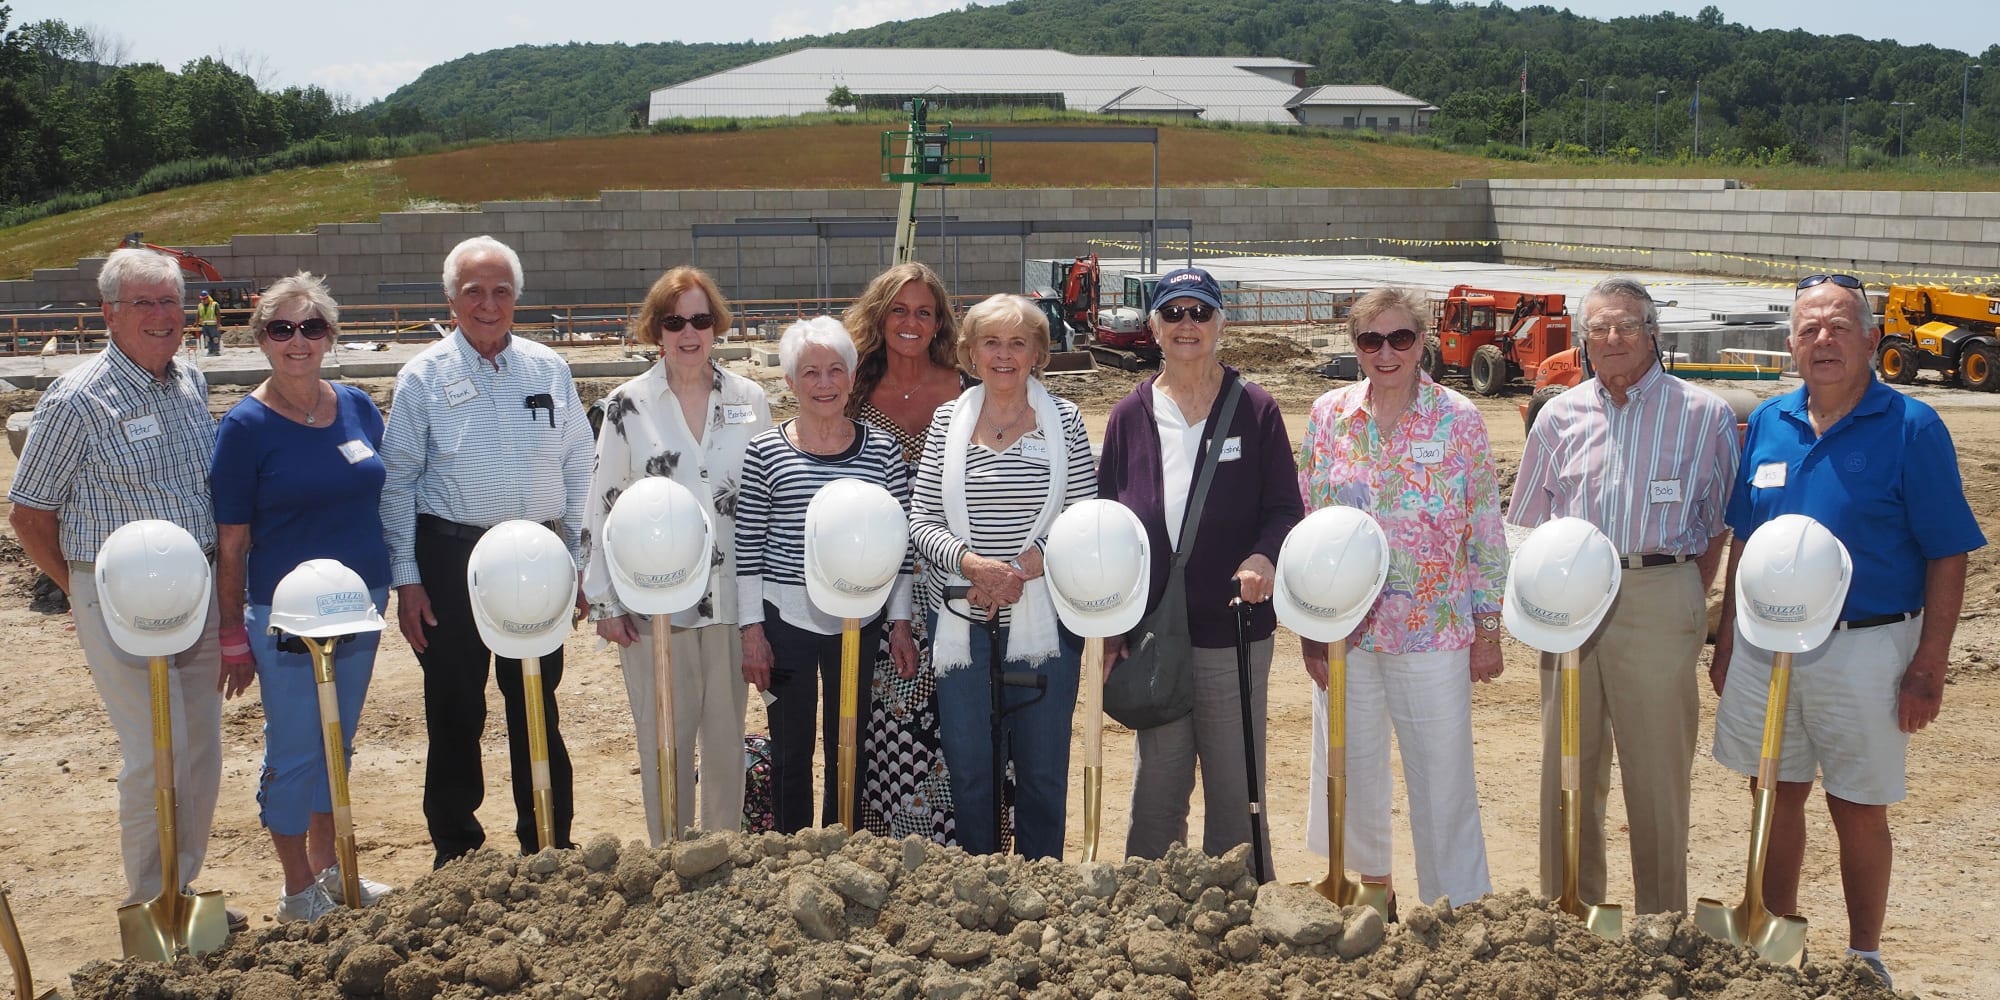 Staff and future residents at the construction site of Keystone Place at Wooster Heights in Danbury, Connecticut.